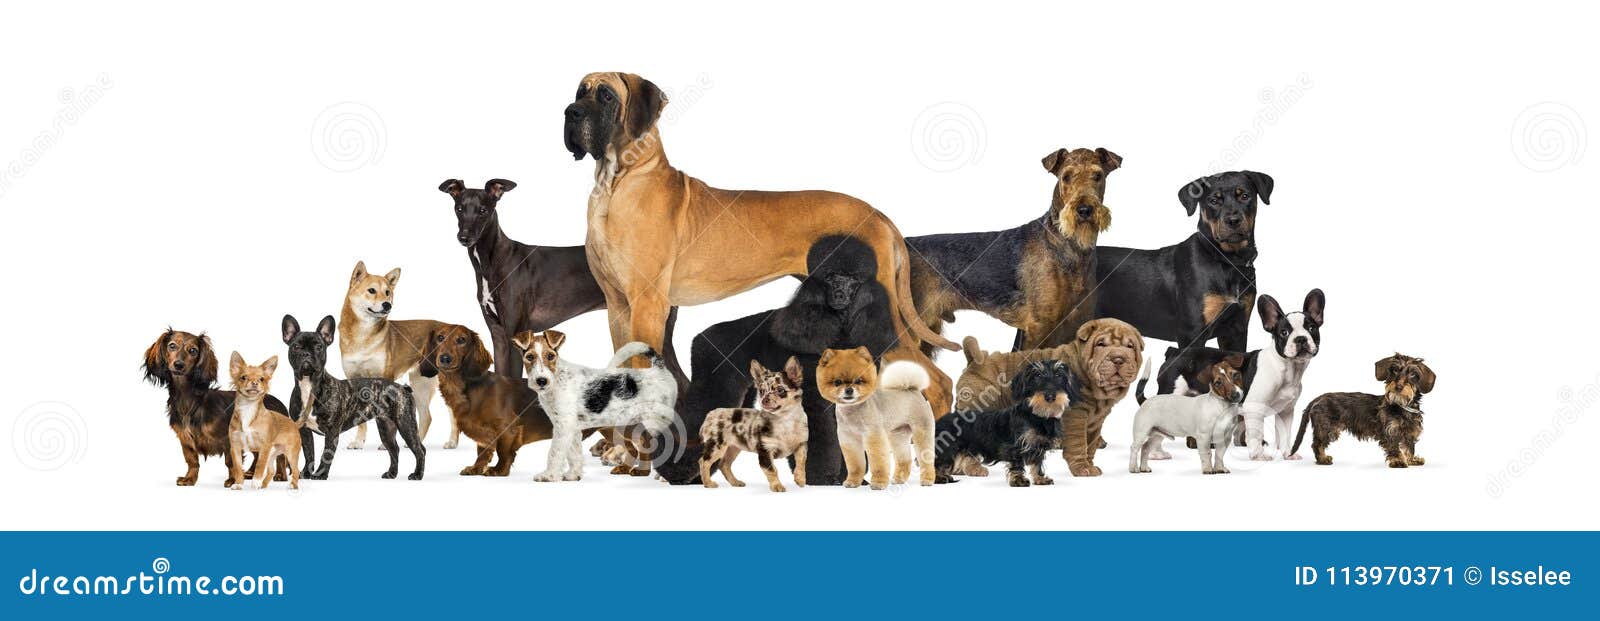 large group of purebred dogs in studio against white background